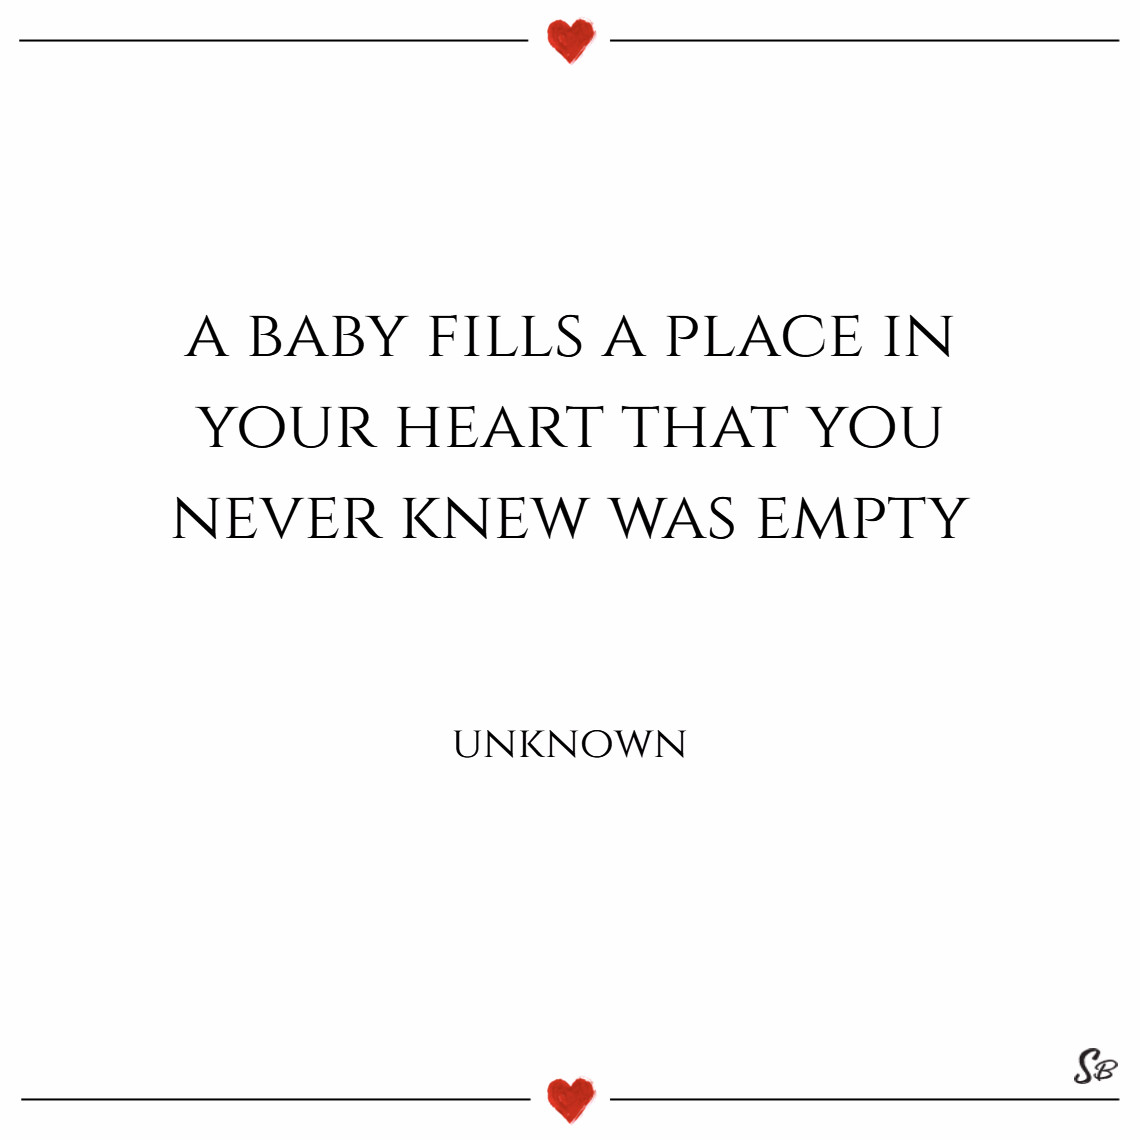 Quotes About Having A Baby Changing Your Life
 A baby fills a place in your heart that you never